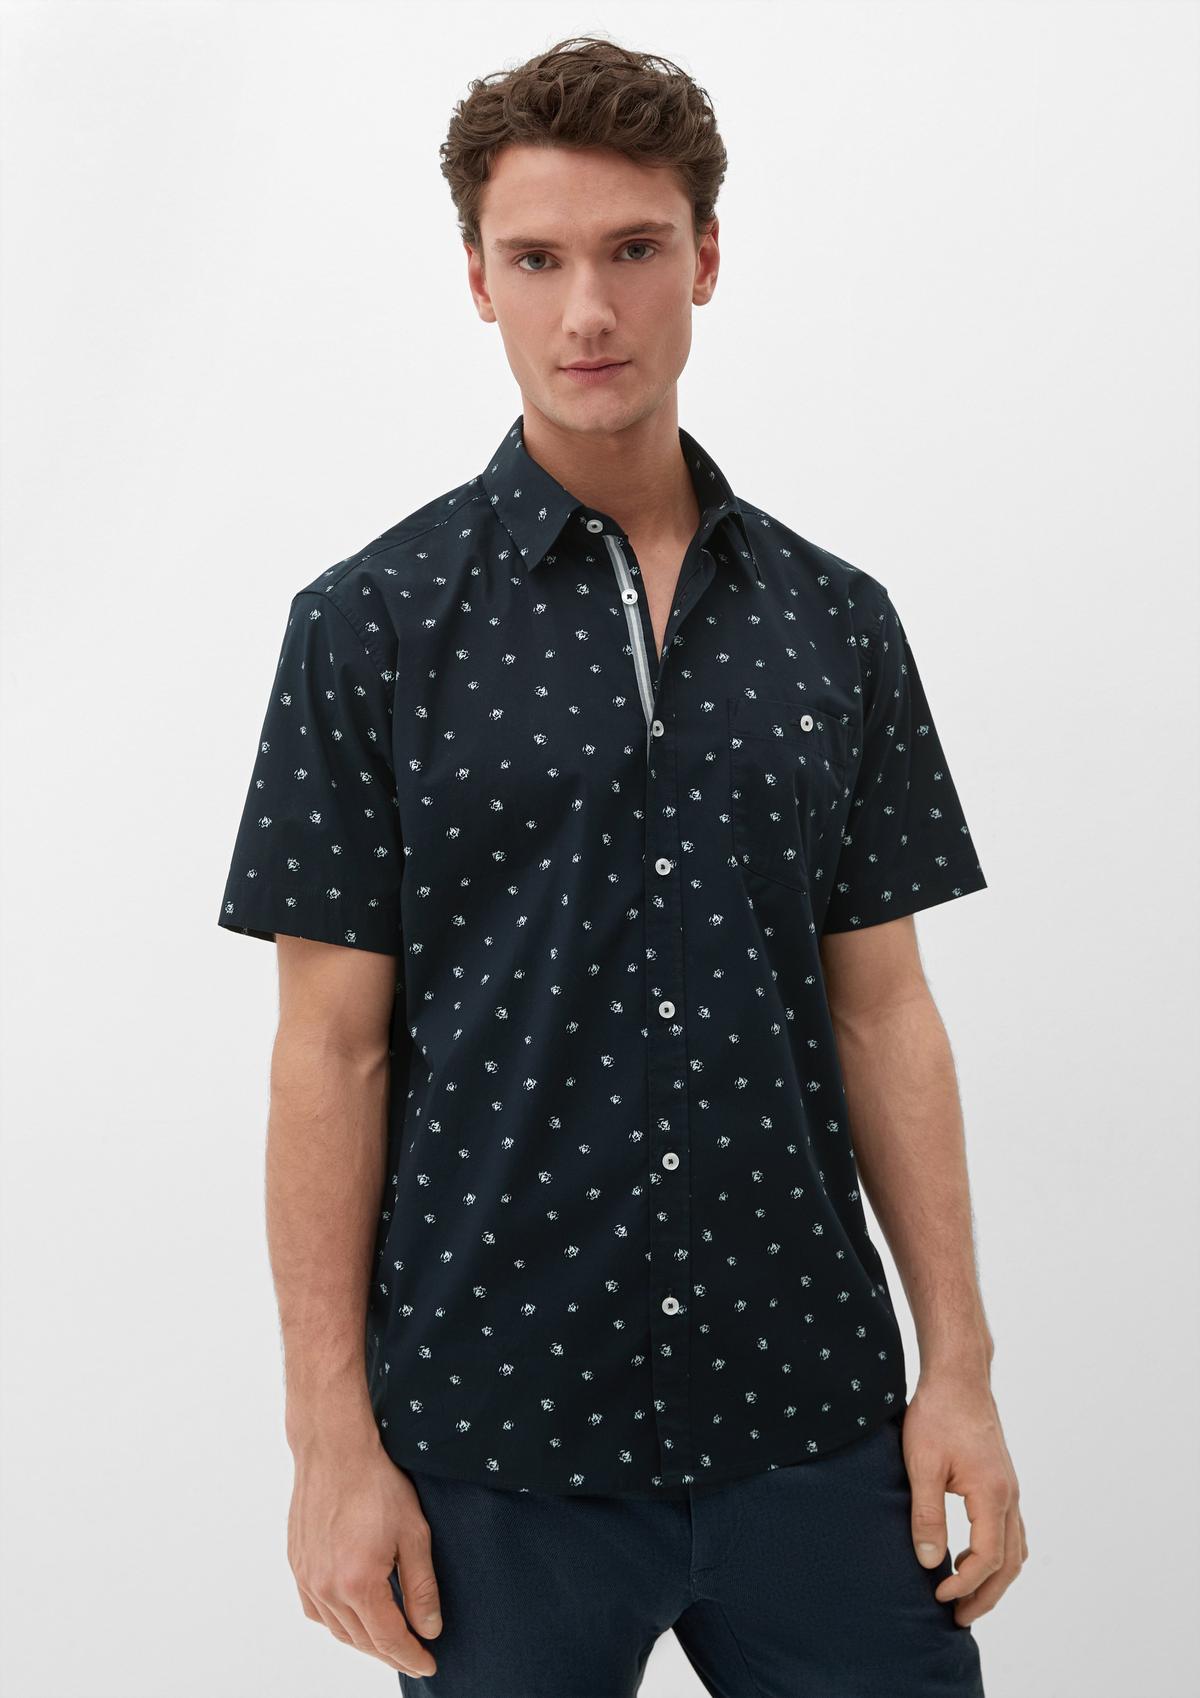 Short sleeve shirt with an all-over print